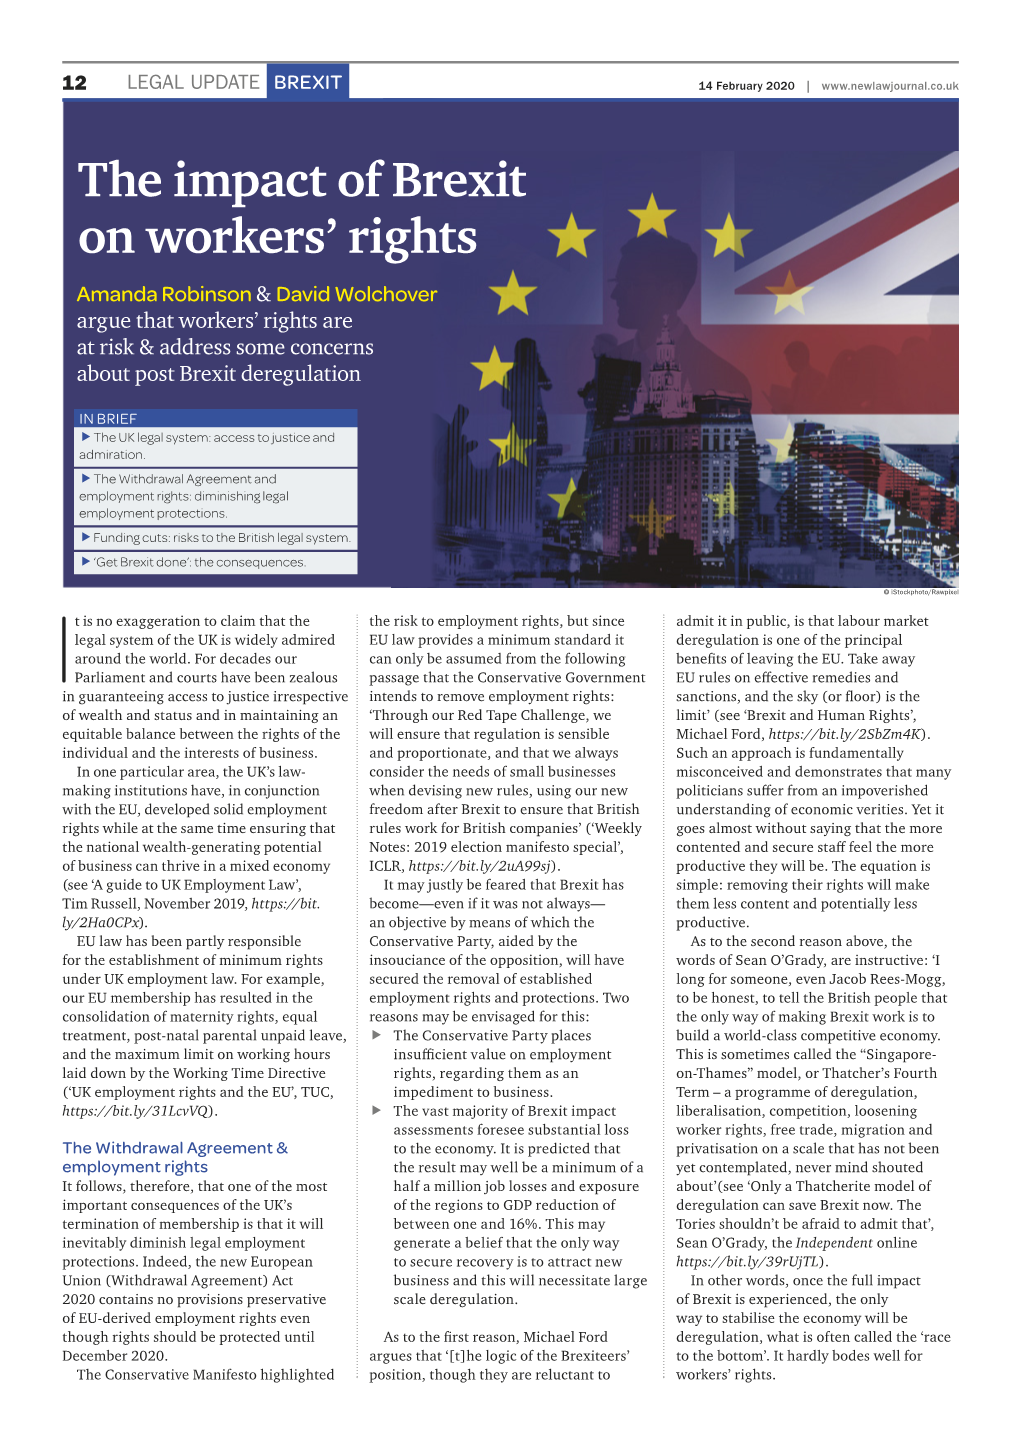 The Impact of Brexit on Workers' Rights